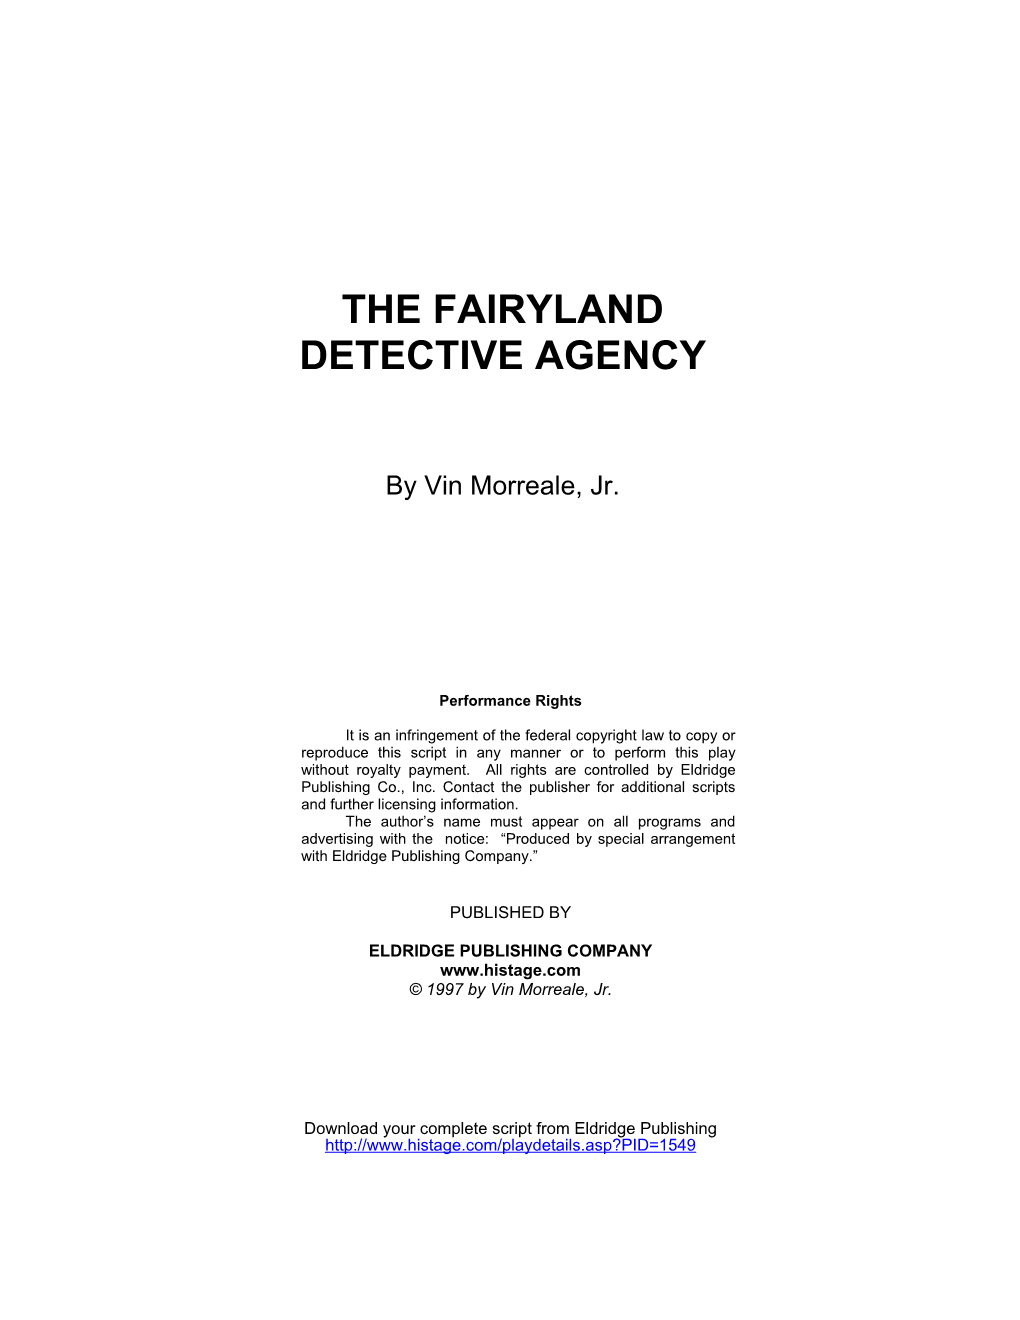 The Fairyland Detective Agency